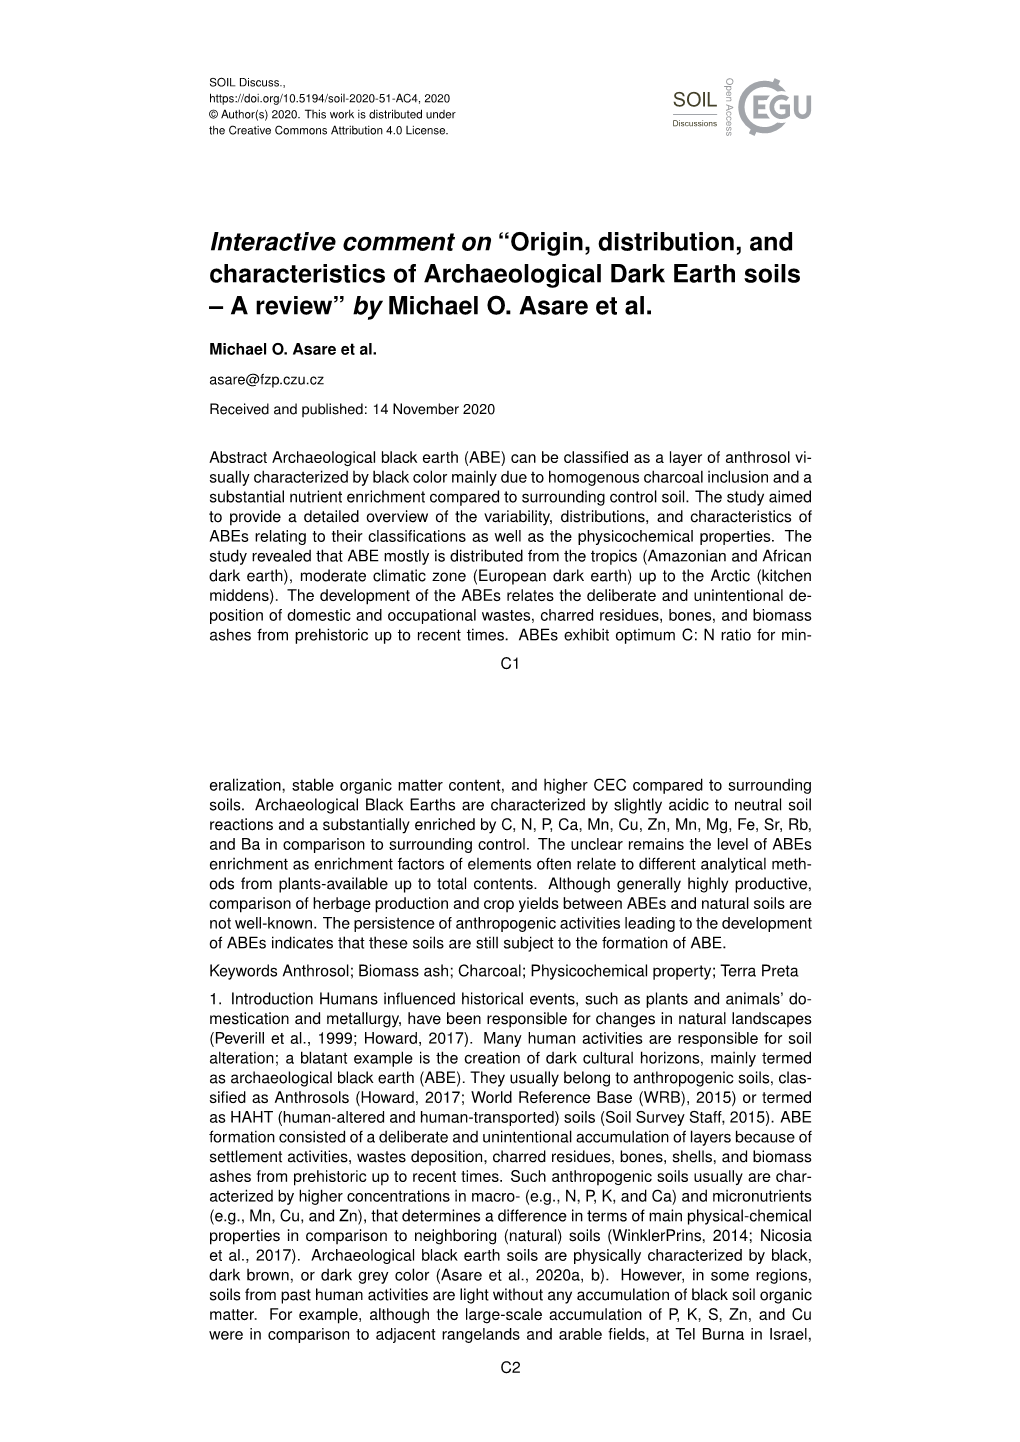 Interactive Comment on “Origin, Distribution, and Characteristics of Archaeological Dark Earth Soils – a Review” by Michael O